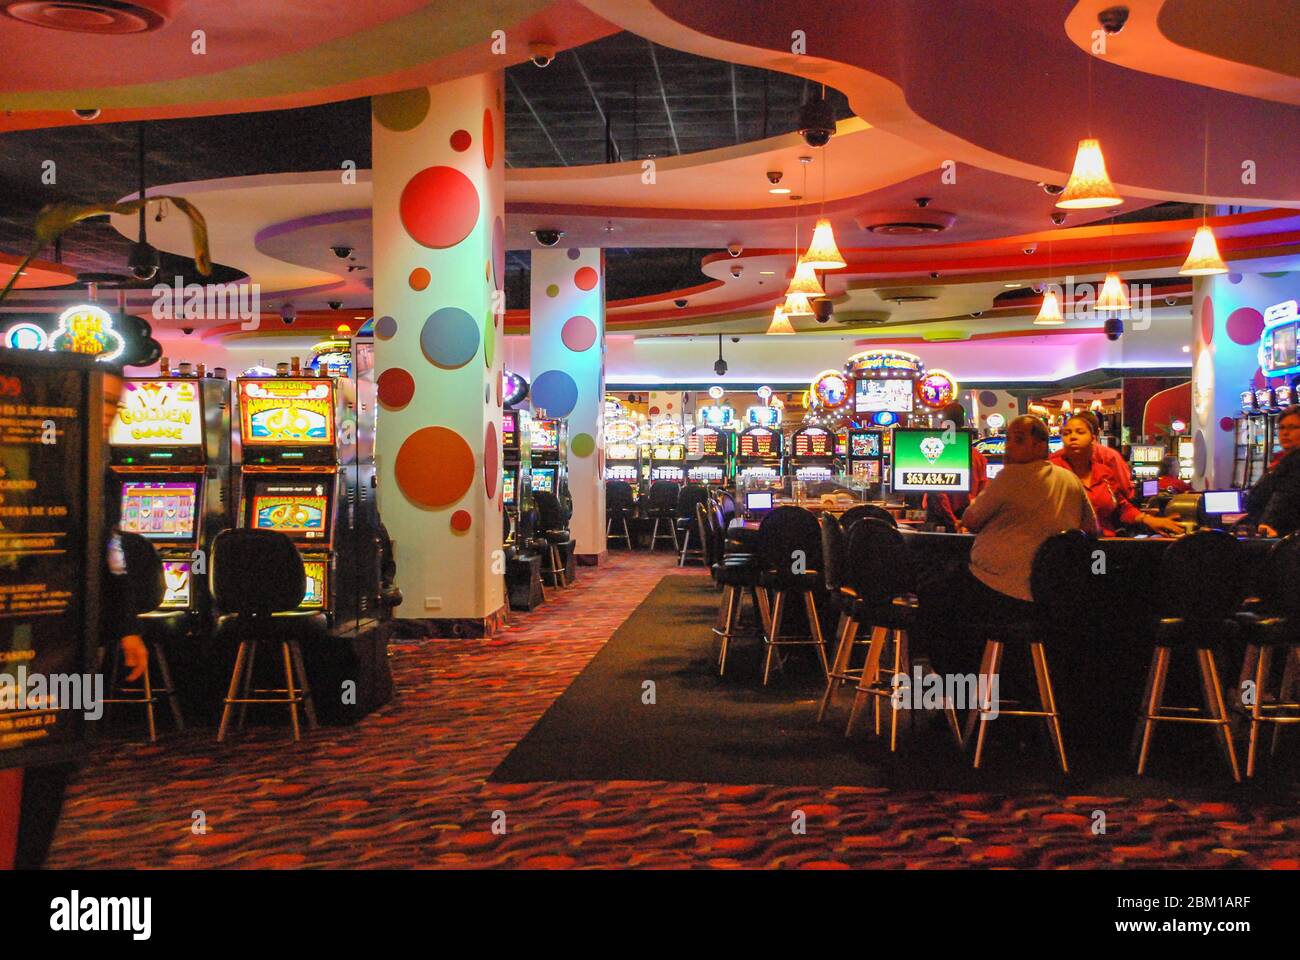 Embassy Suites by Hilton, Hotel and Casino in San Juan, Puerto Rico. Interior of the gambling casino Stock Photo